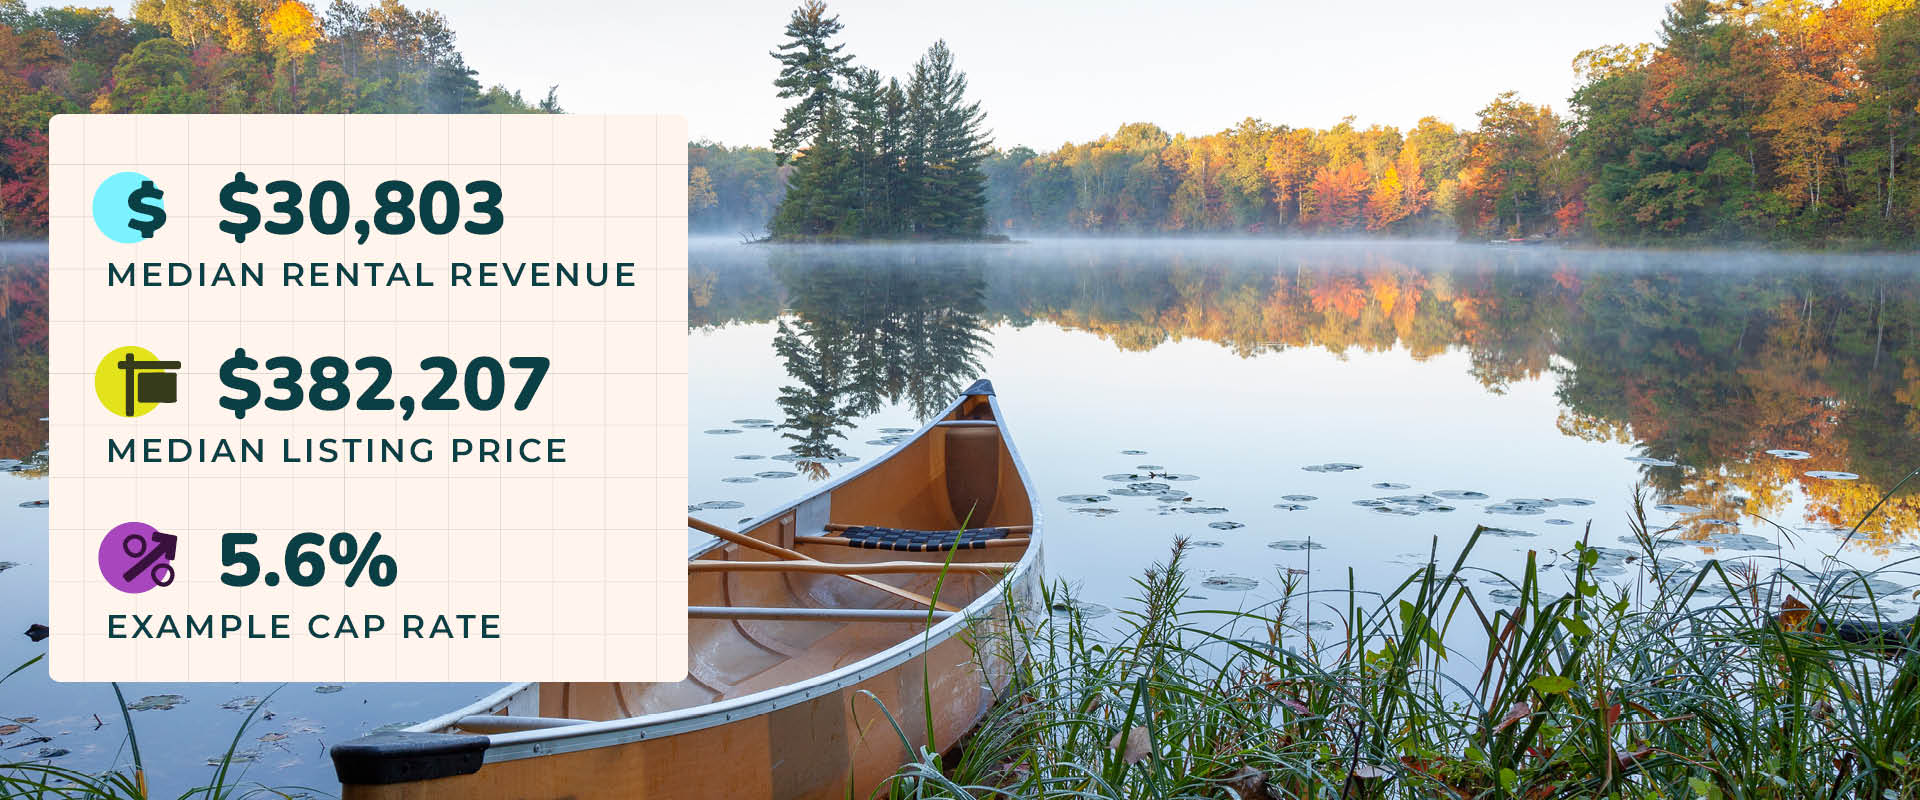 Photo of a canoe sitting in the reeds of a large, foggy lake surrounded by woods in Breezy Point, MN, one of the best places to buy a cabin on a lake. Image text reads, "$30,803 median rental revenue. $382,207 median listing price. 5.6% example cap rate."